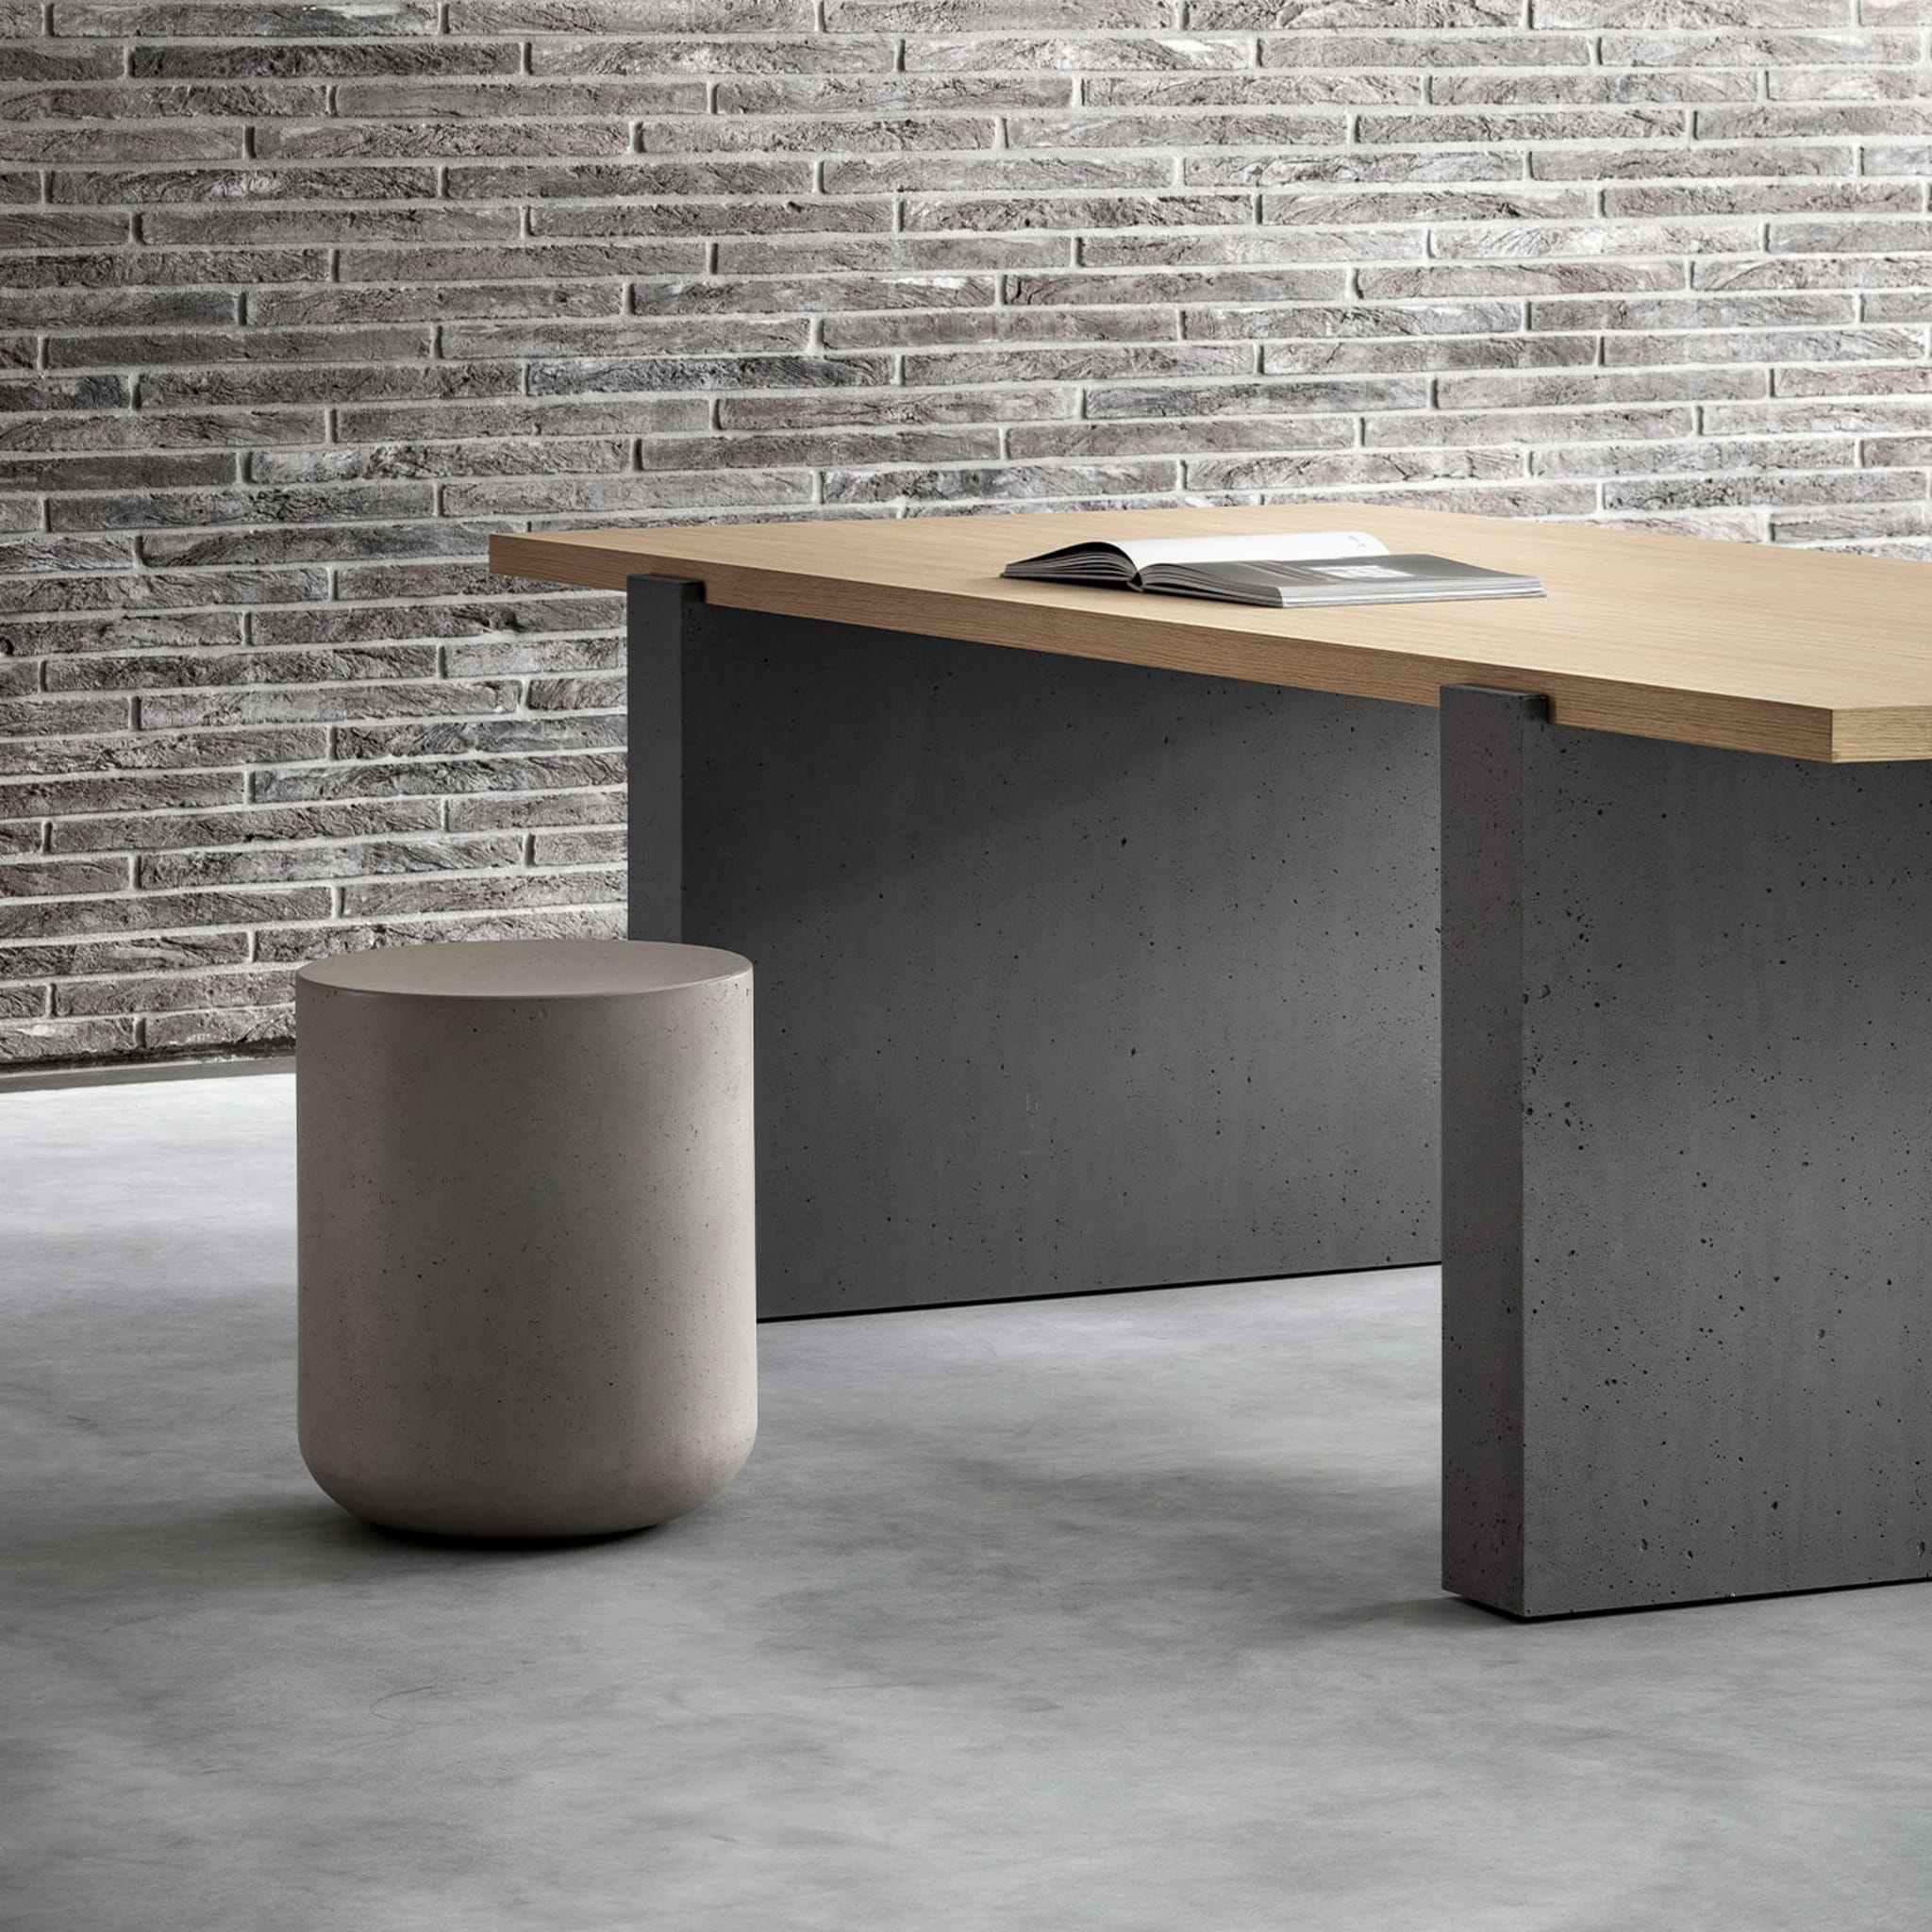 Accademia Table by Studio 63 - Alternative view 2